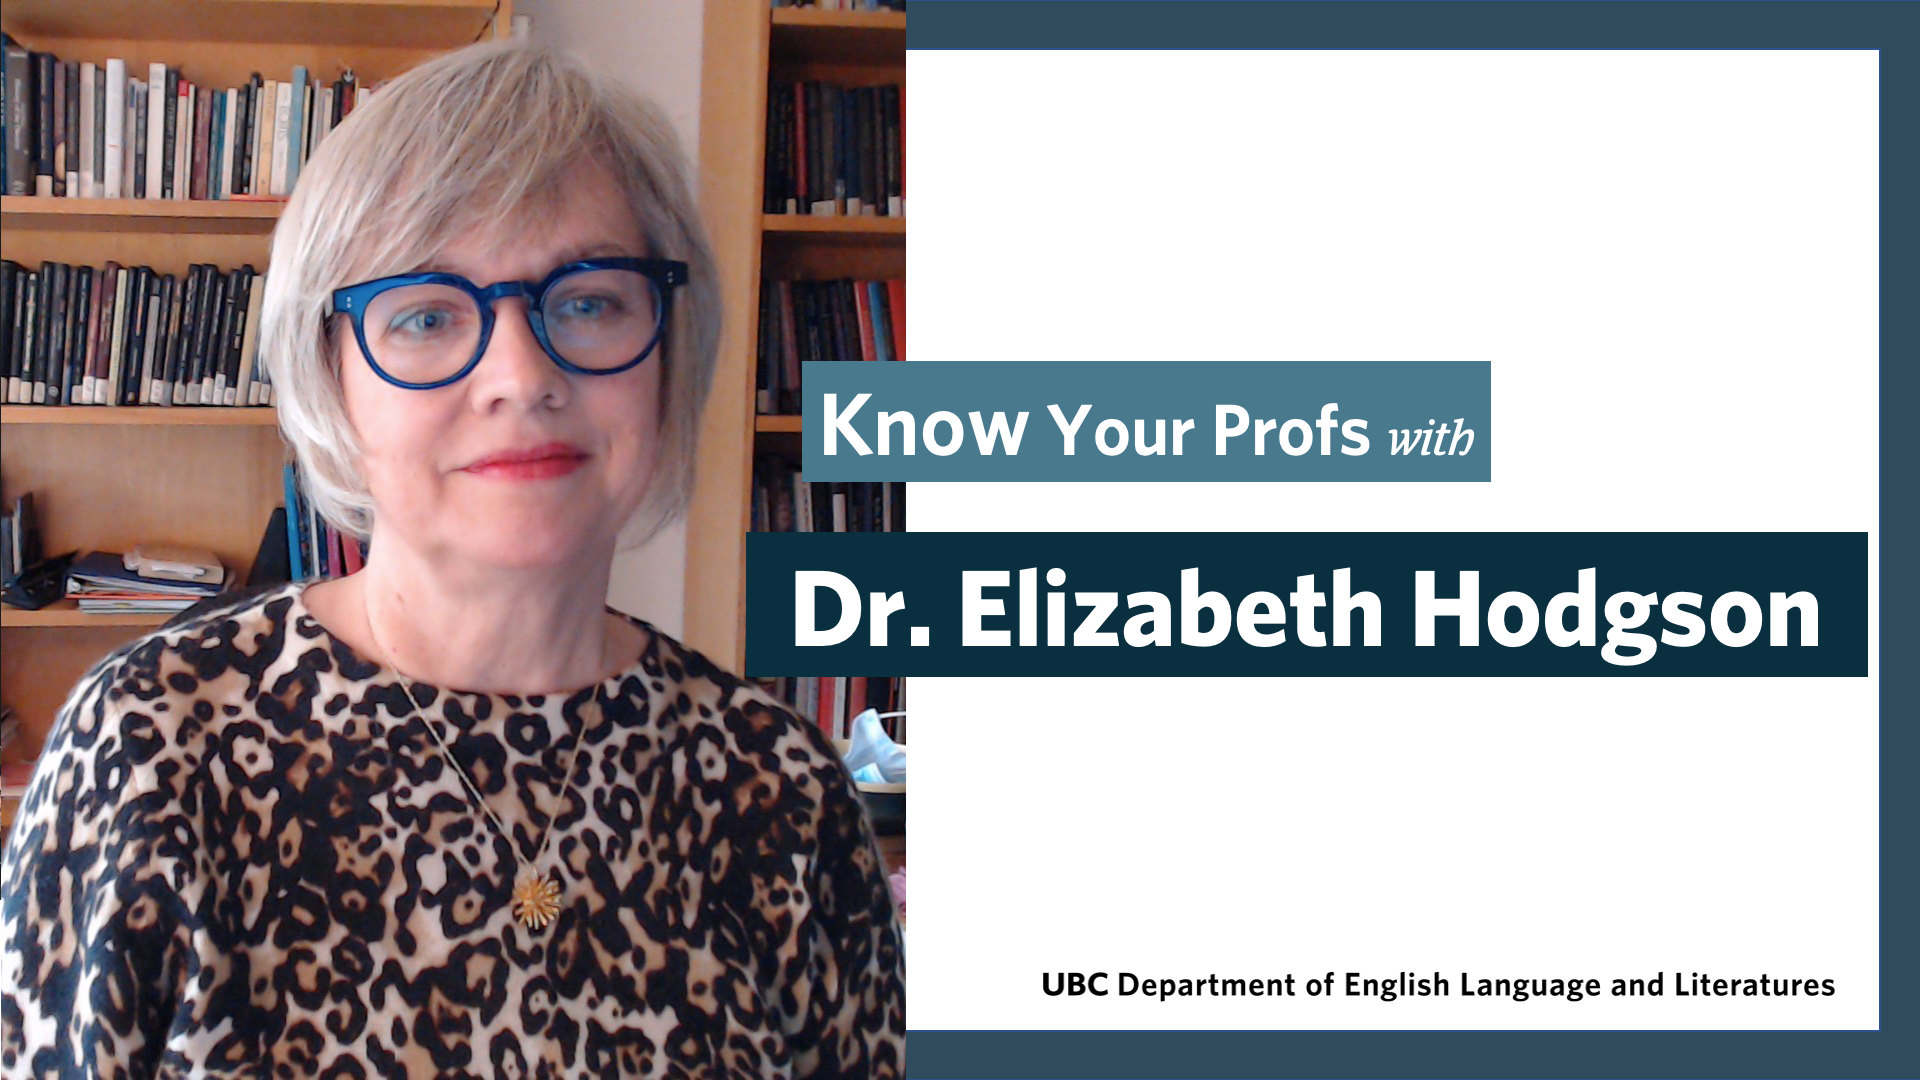 An image of Dr. Elizabeth Hodgson next to text that reads Know Your Profs with Dr. Elizabeth Hodgson. Dr. Hodgson is wearing a leopard print shirt and around her neck is a gold spherical pendent with spikes. She has blonde short hair cut into a bob above the chin with side swept bangs and dark blue glasses. She is smiling at the camera, in front of two bookshelves.